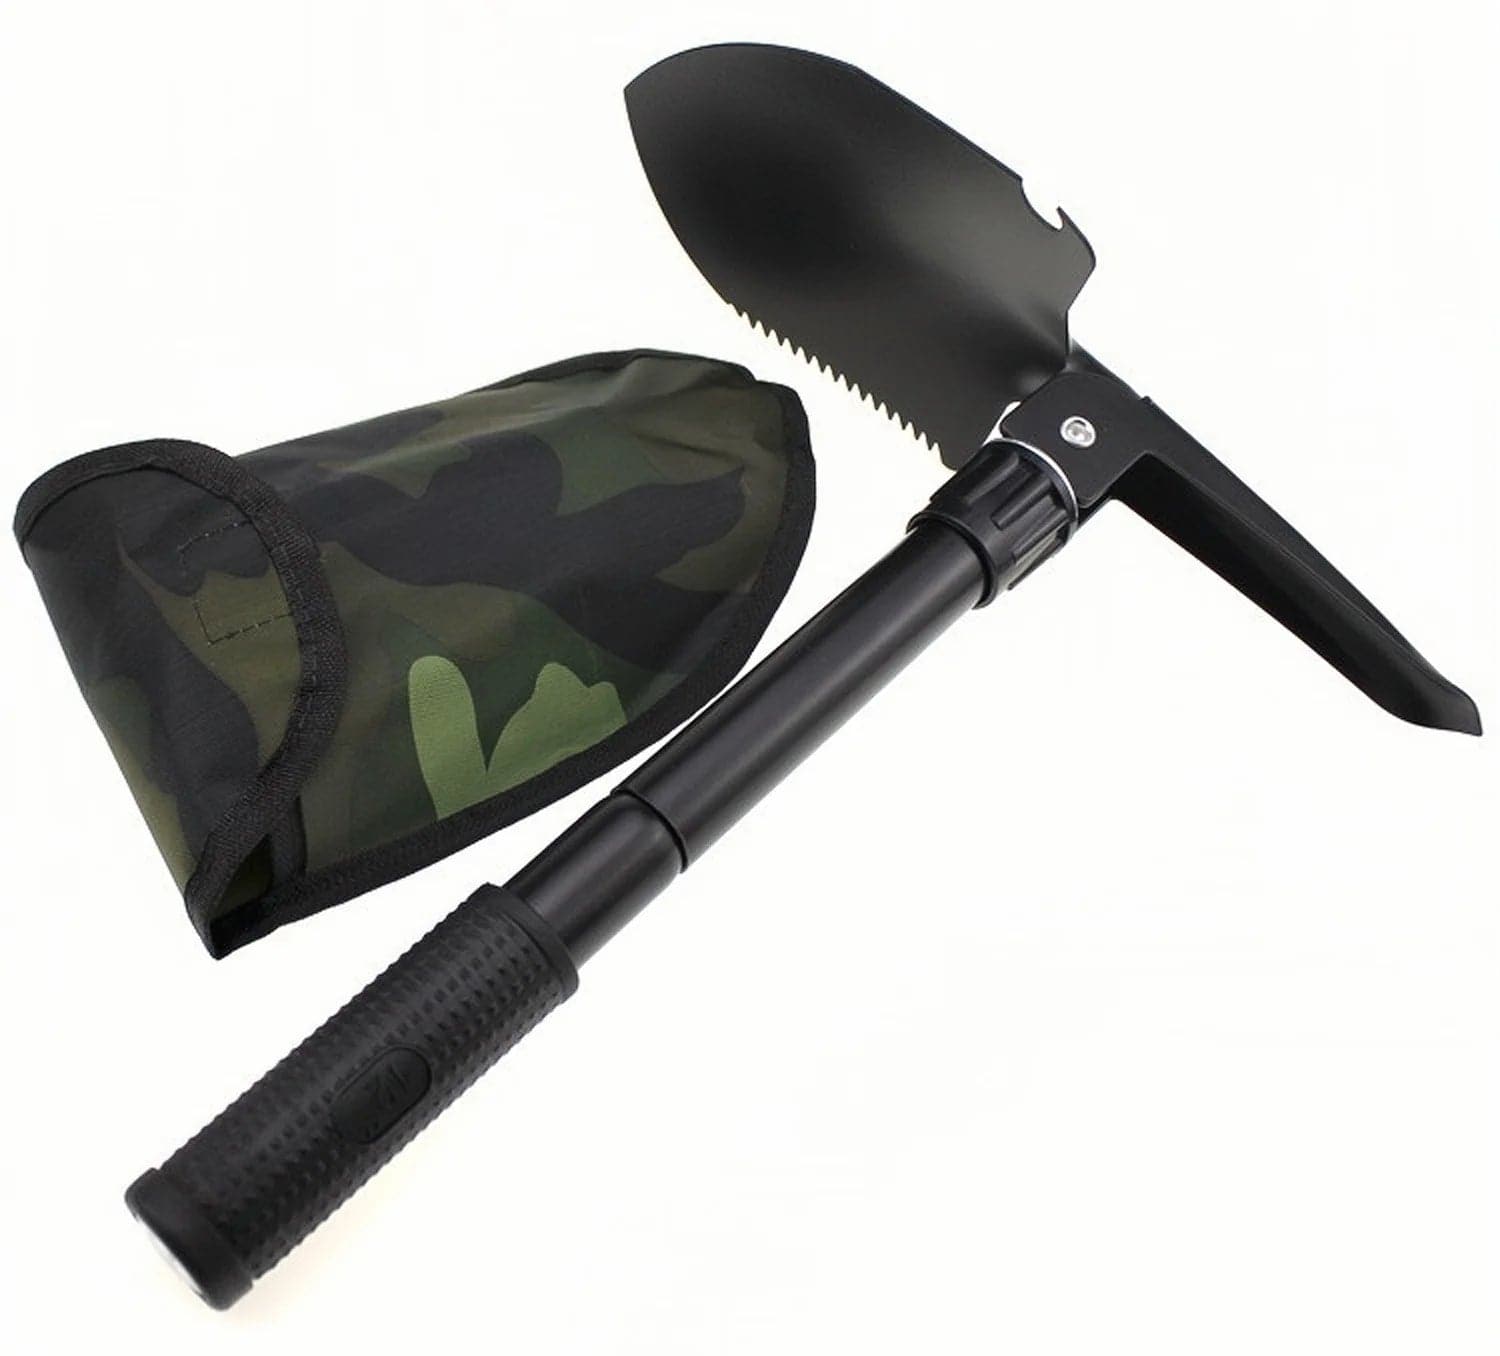 Compact Multifunctional Camping Shovel - Military-Grade Survival Tool for Outdoor Adventures - Betatton - 